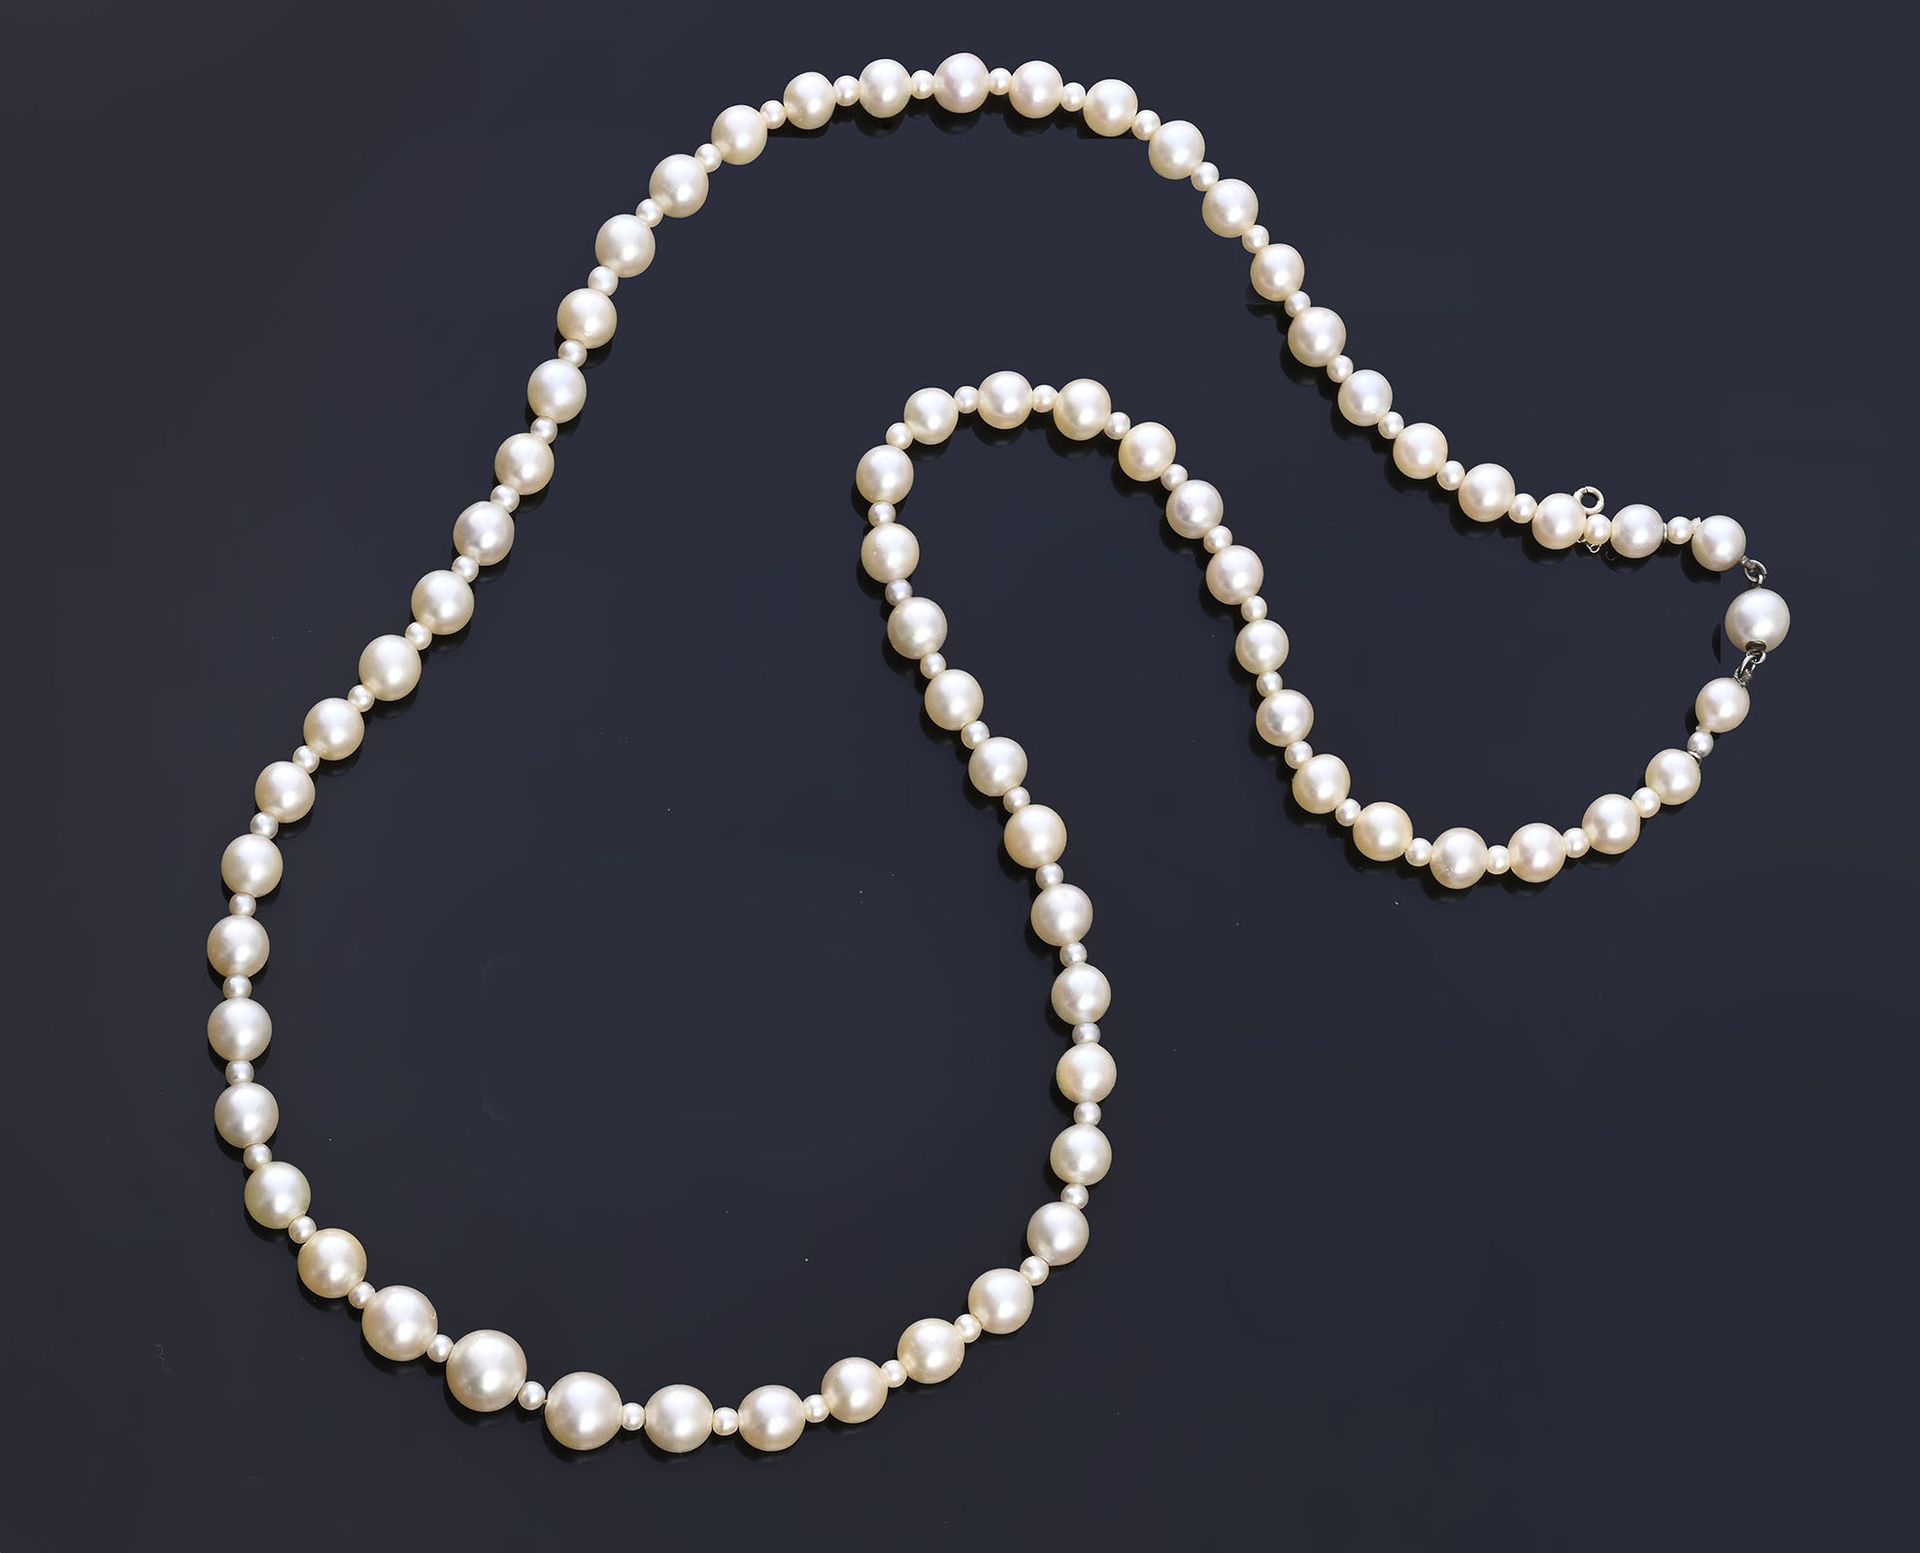 Null Opera necklace made of pearl drops (9 mm to 6 mm) with small interspersed p&hellip;